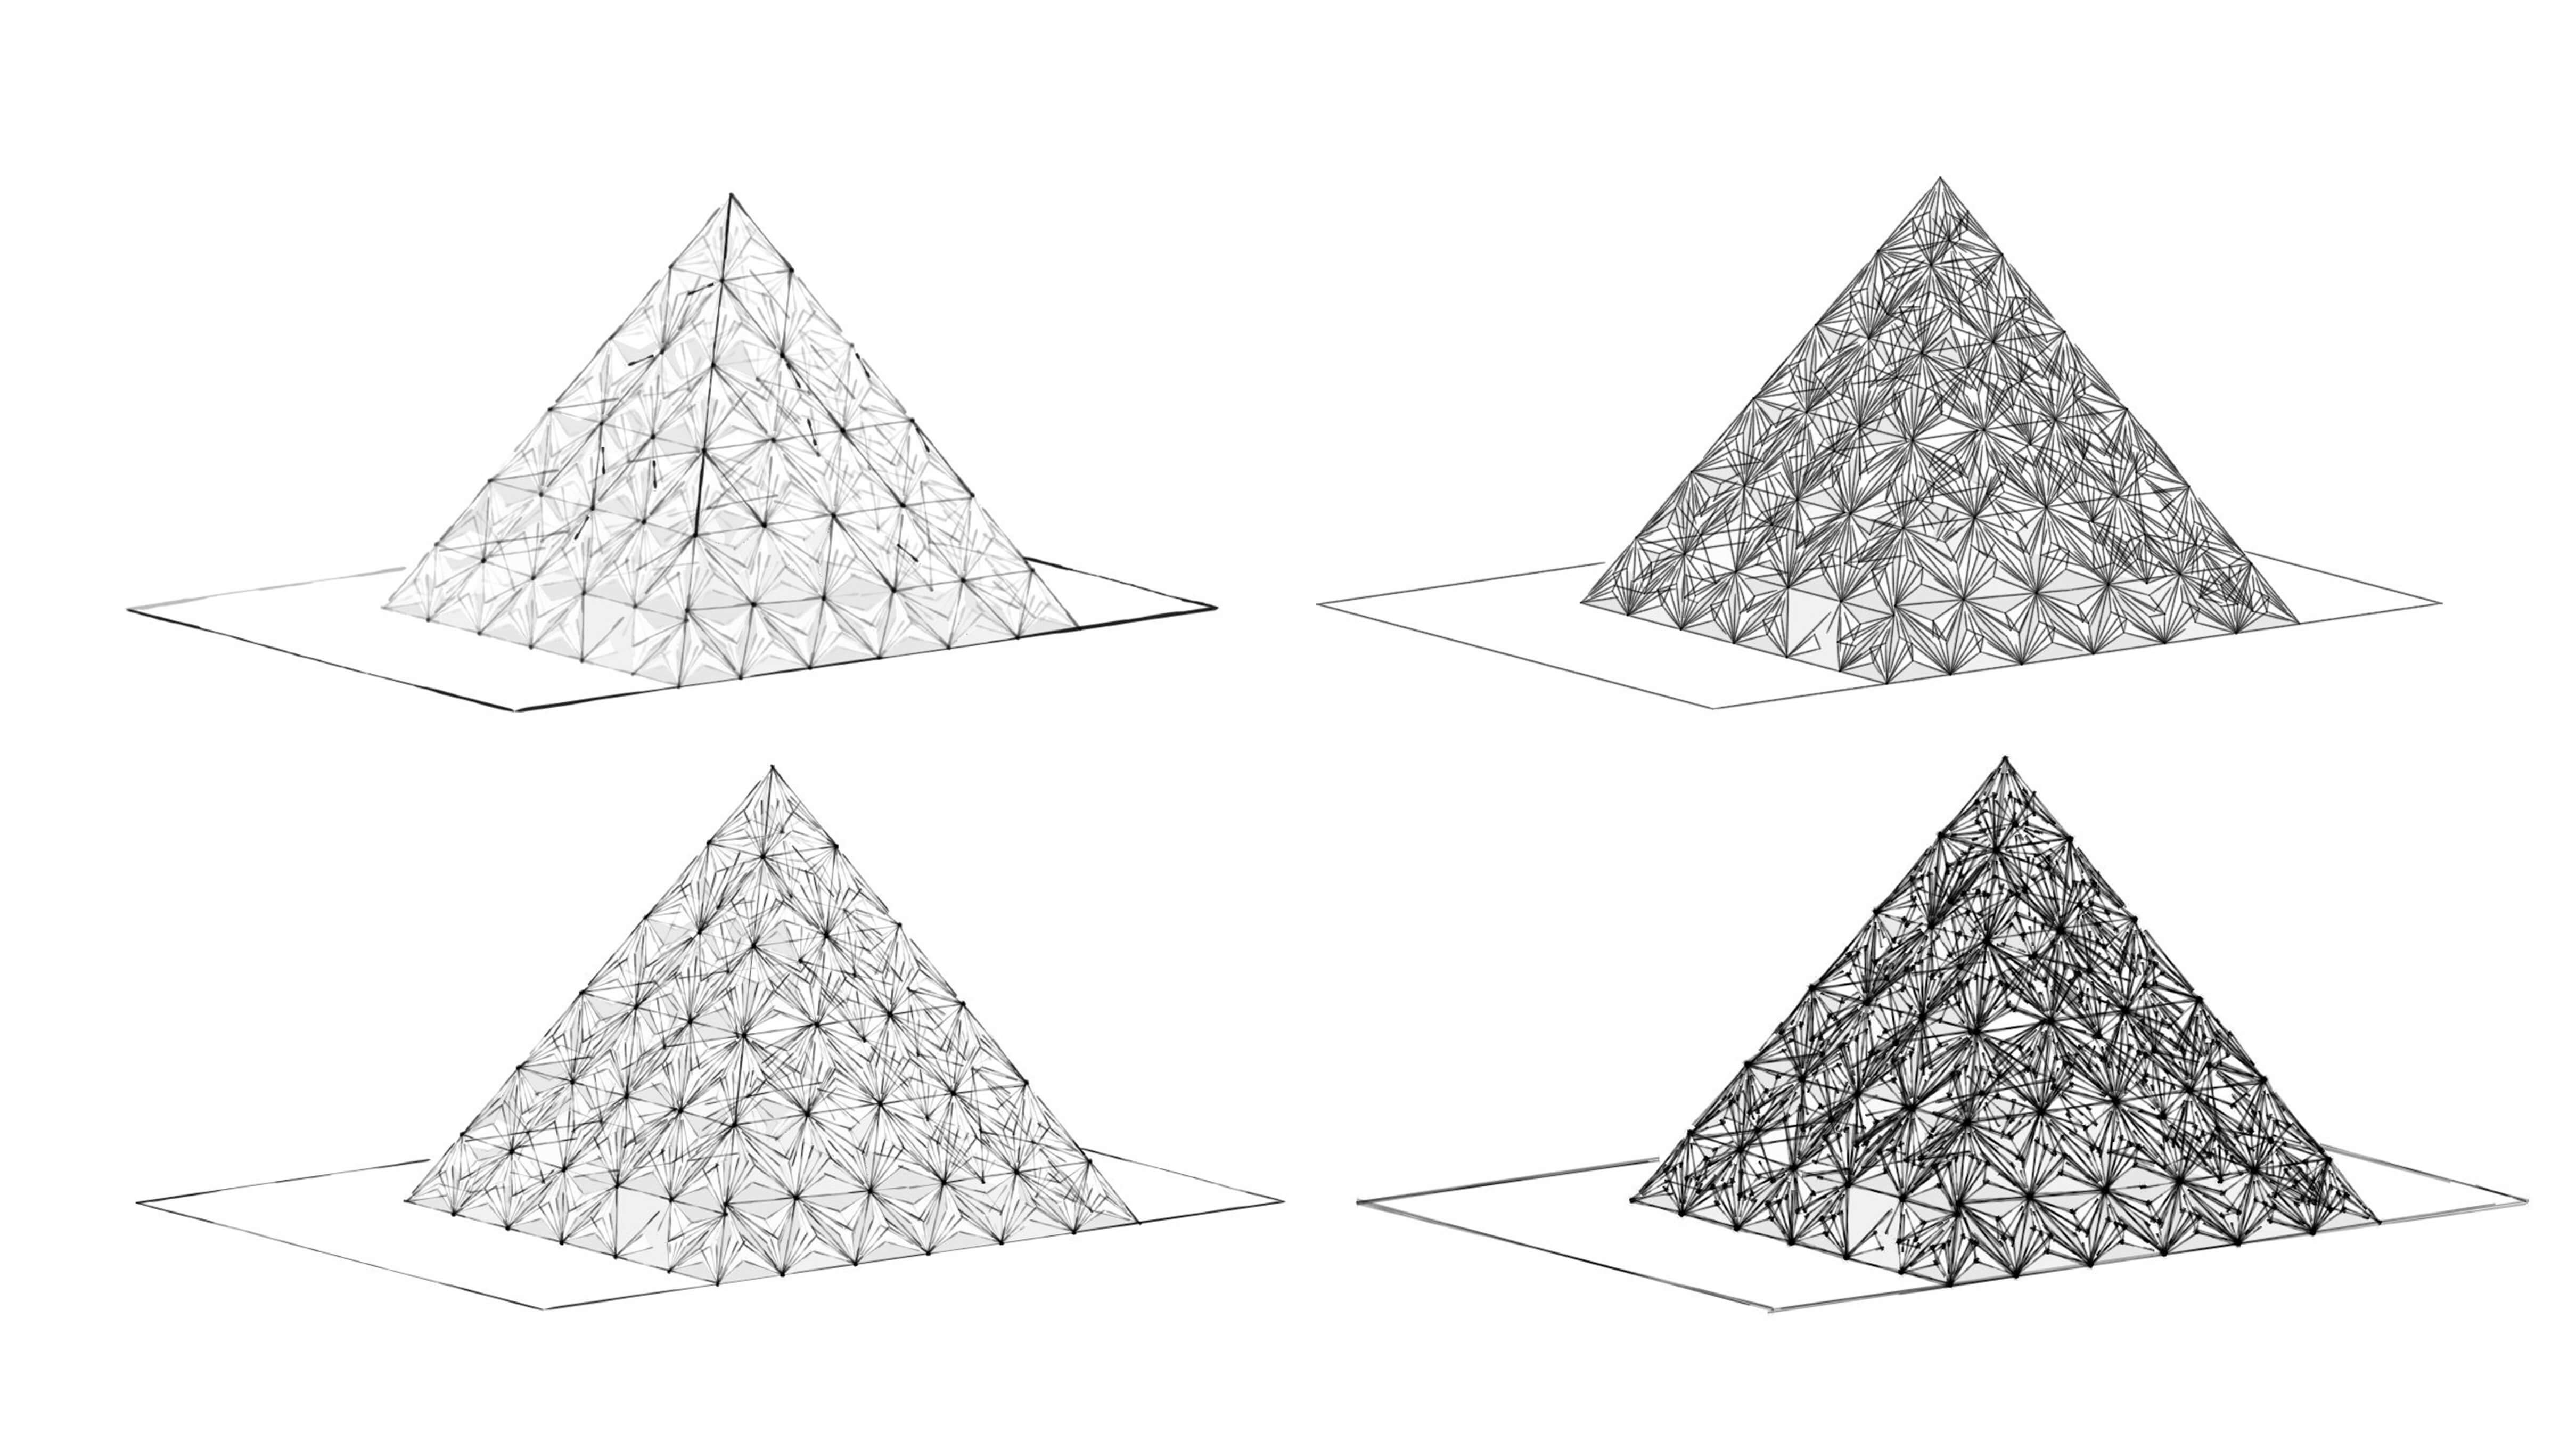 CASE STUDY: The Geometrization Of Architectural Form – Triangle